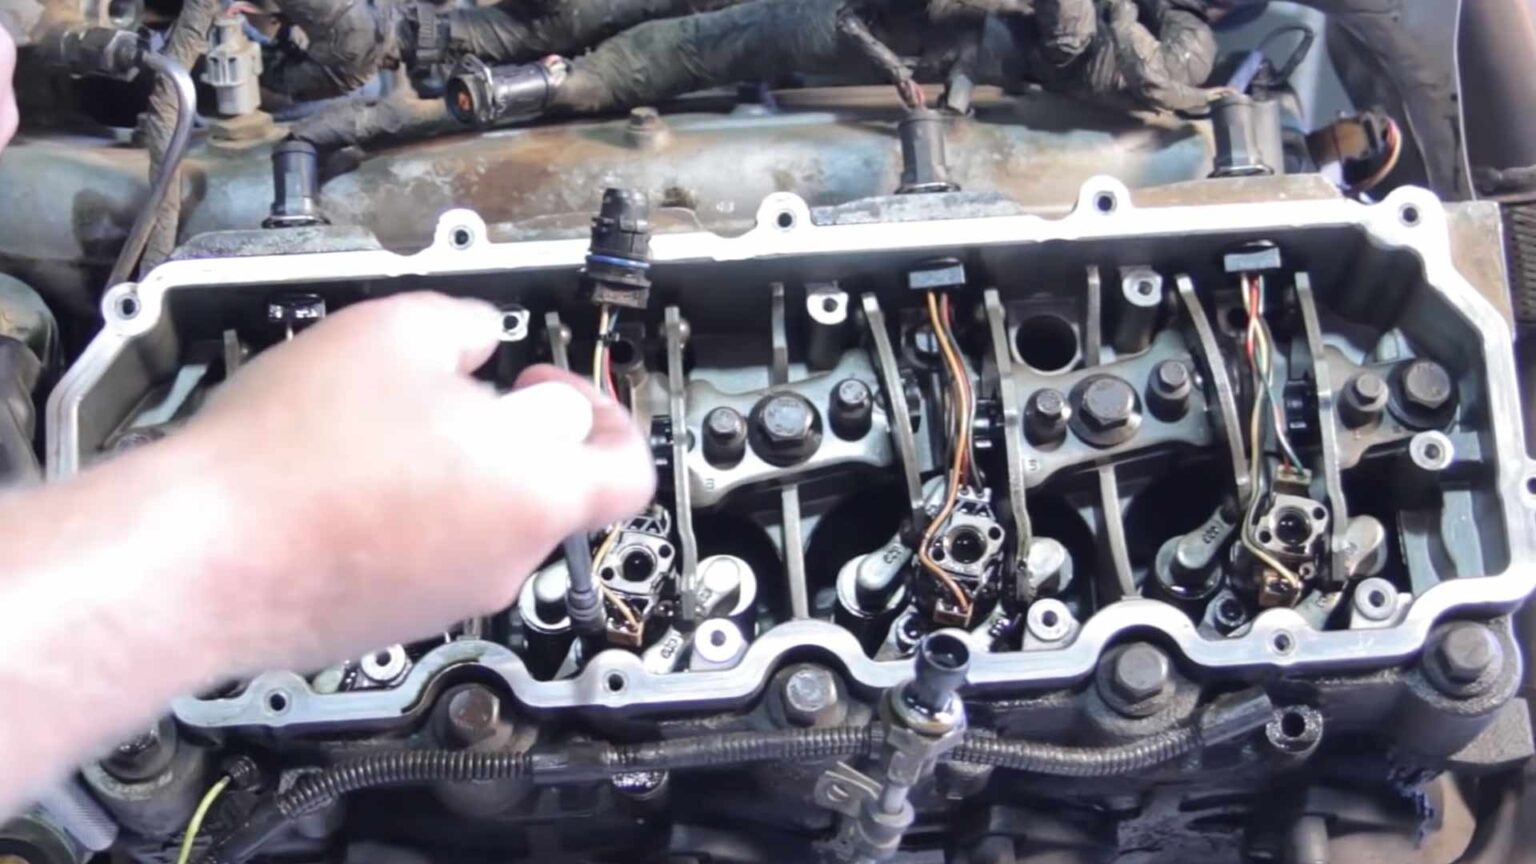 How to Replace 6.0 Powerstroke Injectors